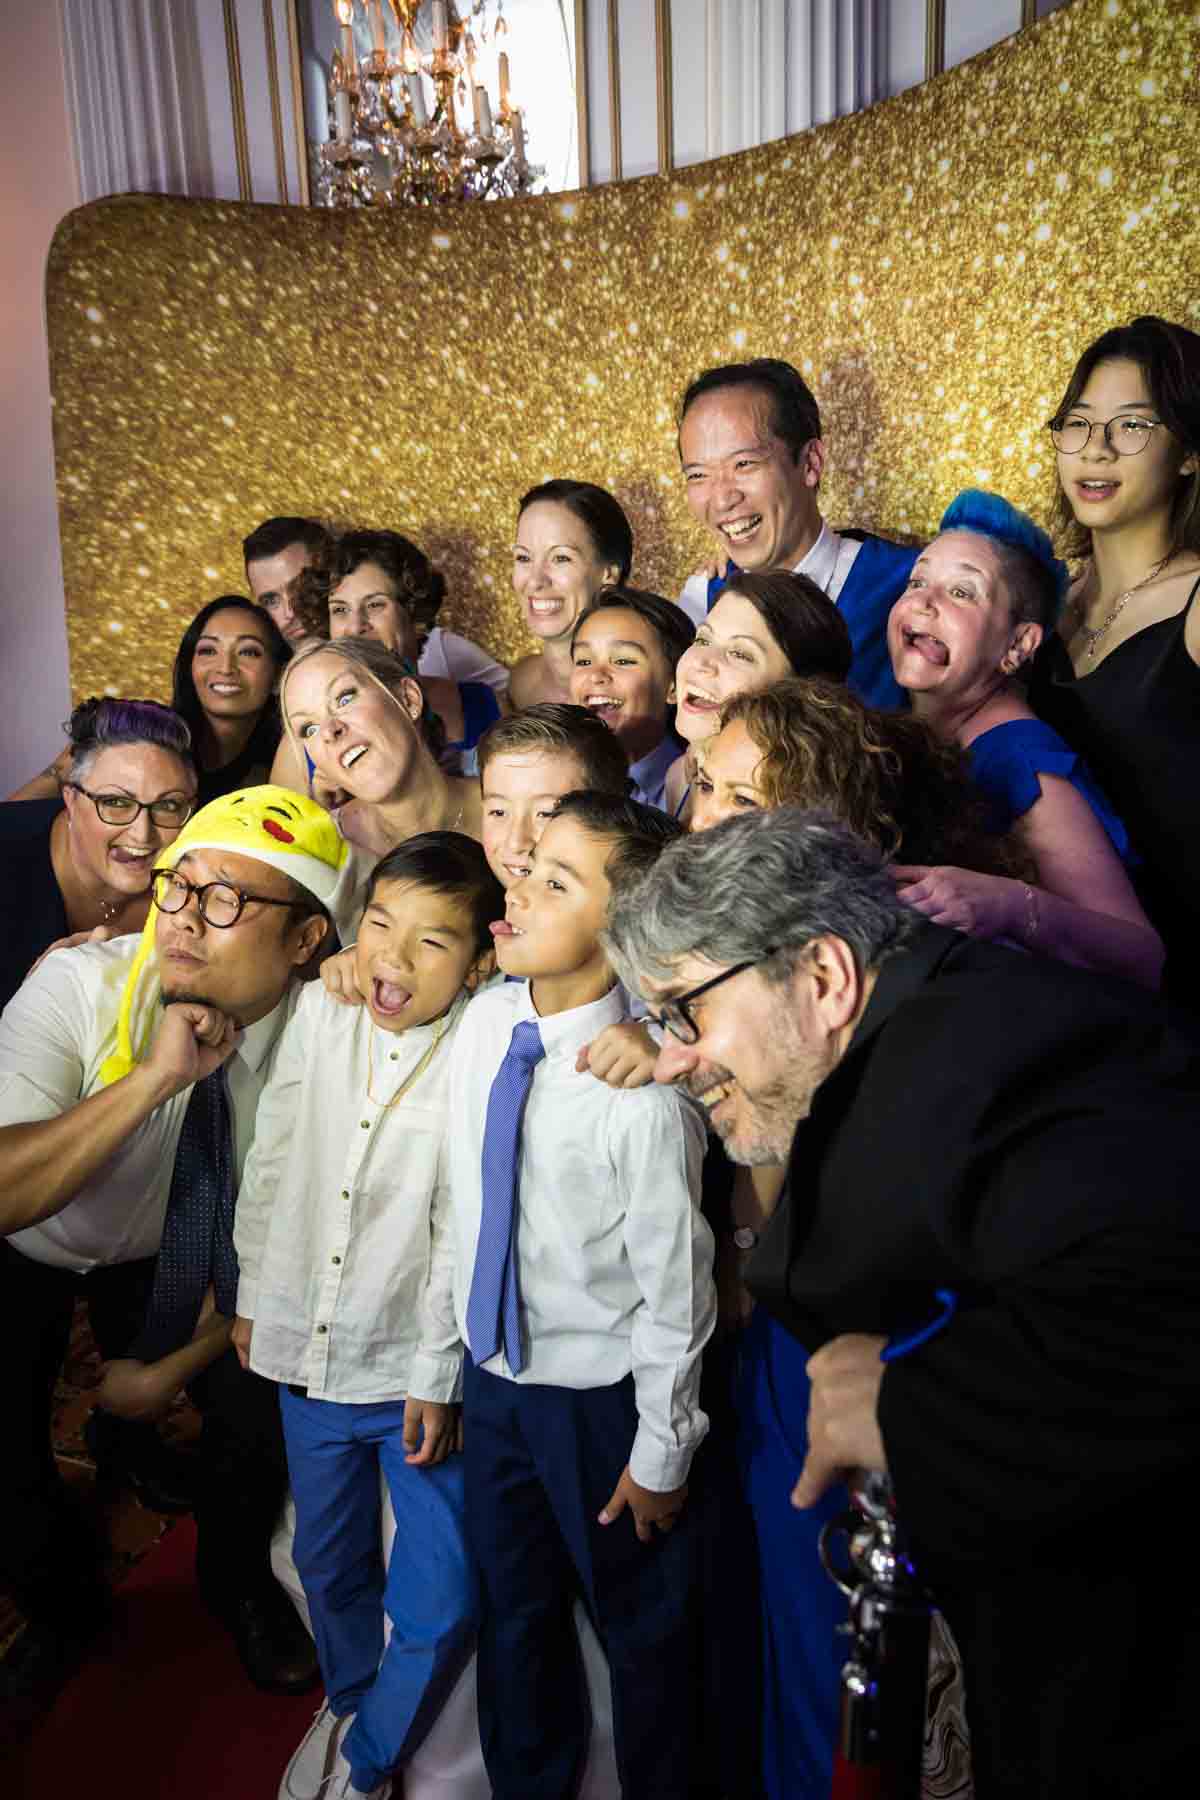 Guests piled up in front of gold background at a photo booth at a Terrace on the Park wedding